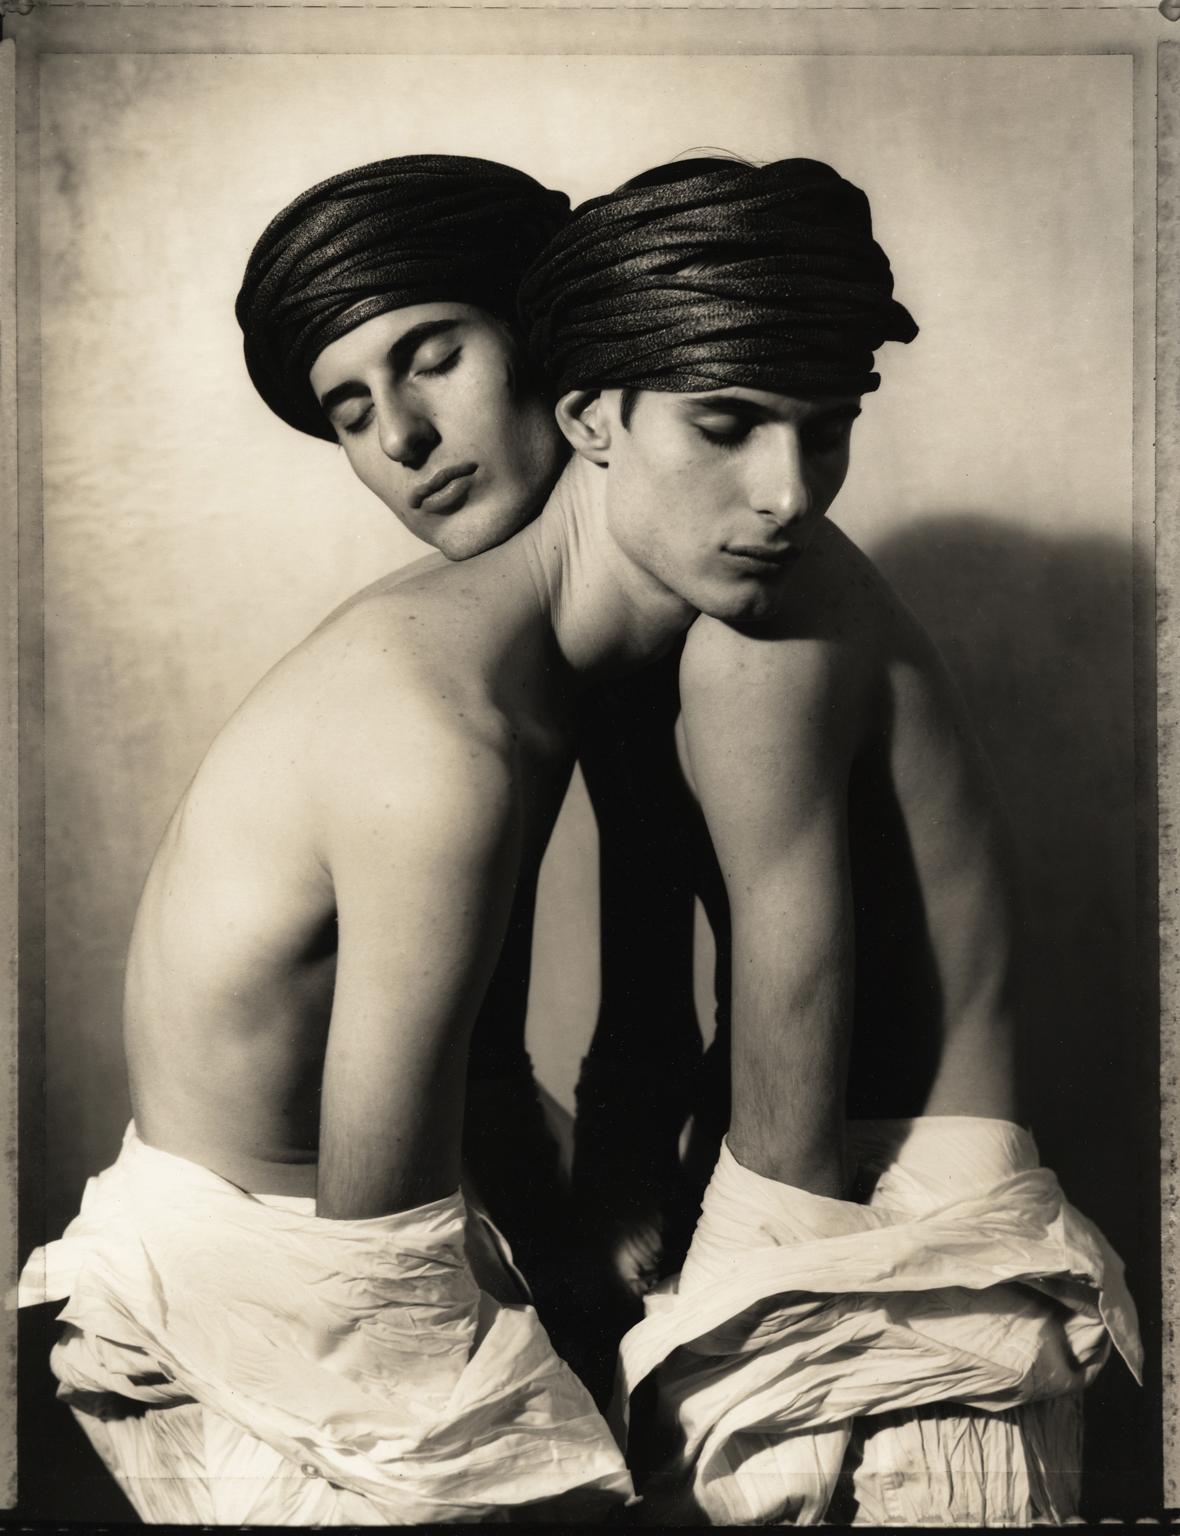 Twins Entwined, 1991: Identical twins photographed together in studio portrait. For Sale 2